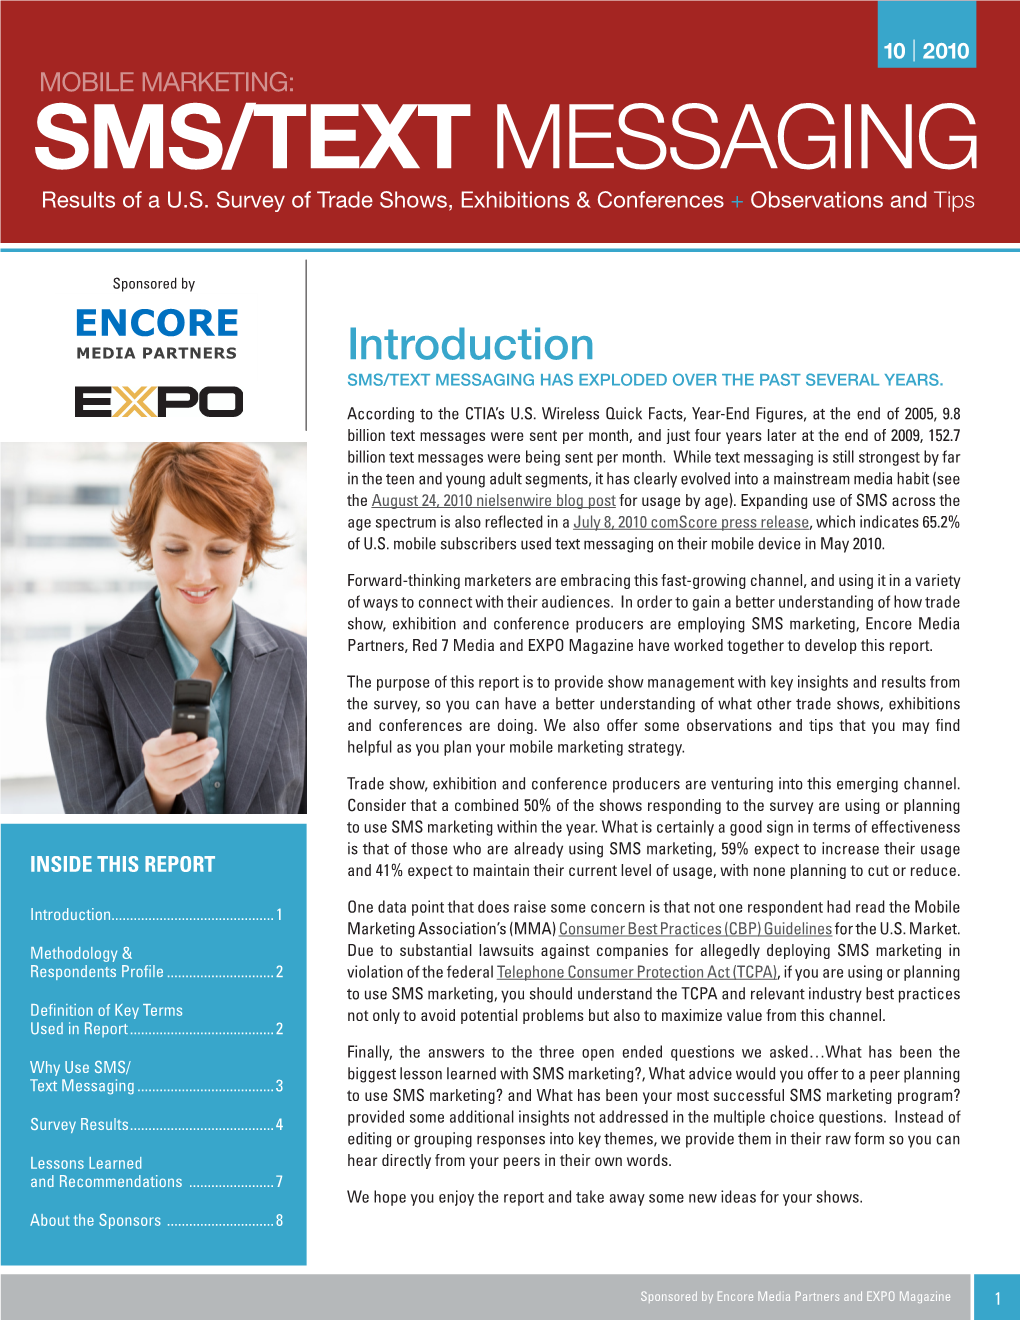 SMS/TEXT MESSAGING Results of a U.S